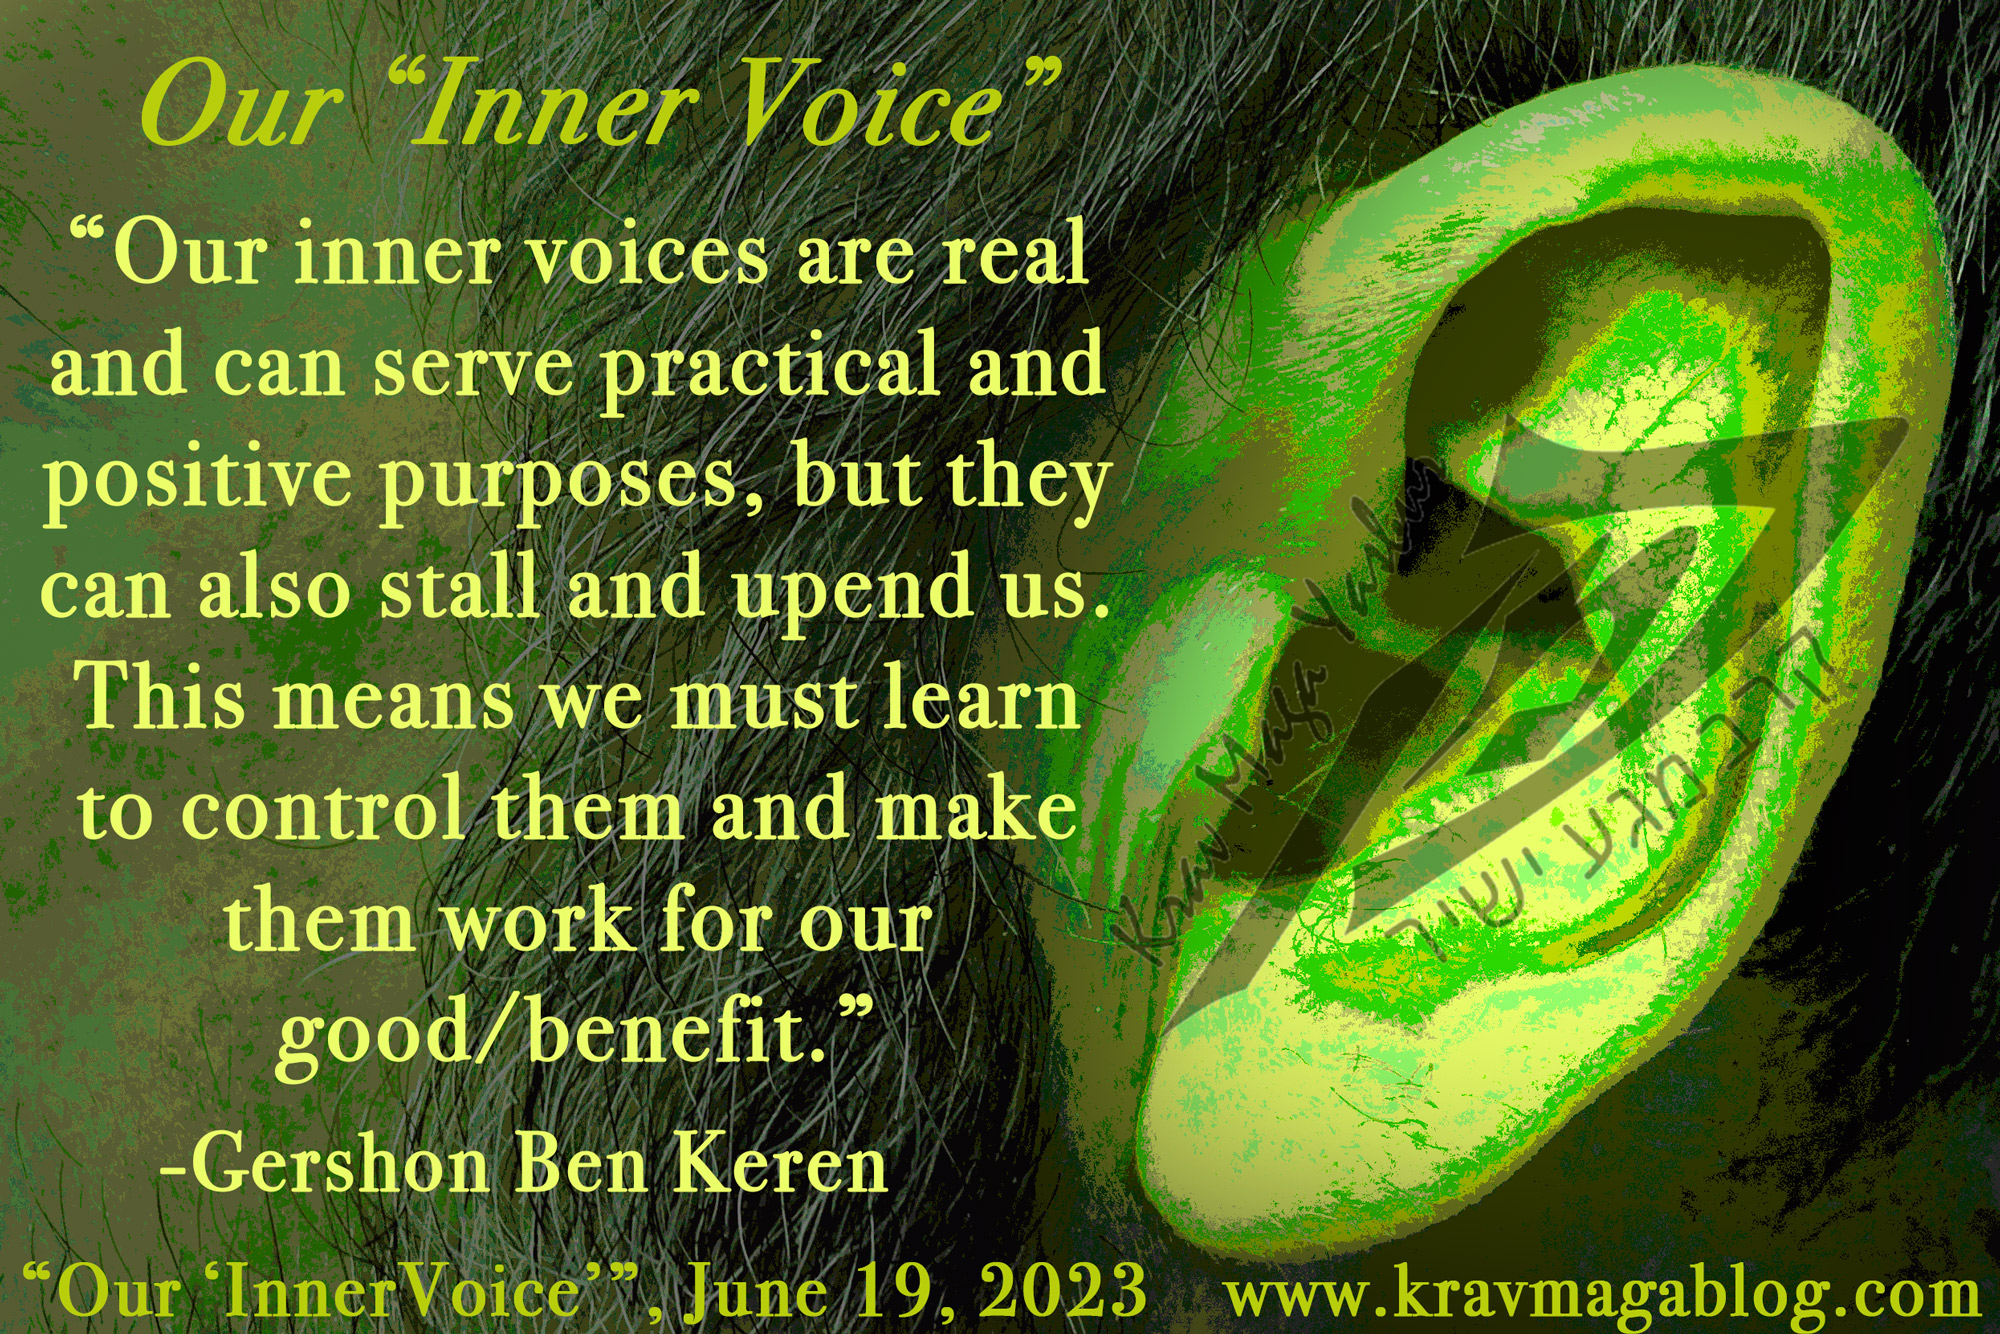 Blog About Our Inner Voice